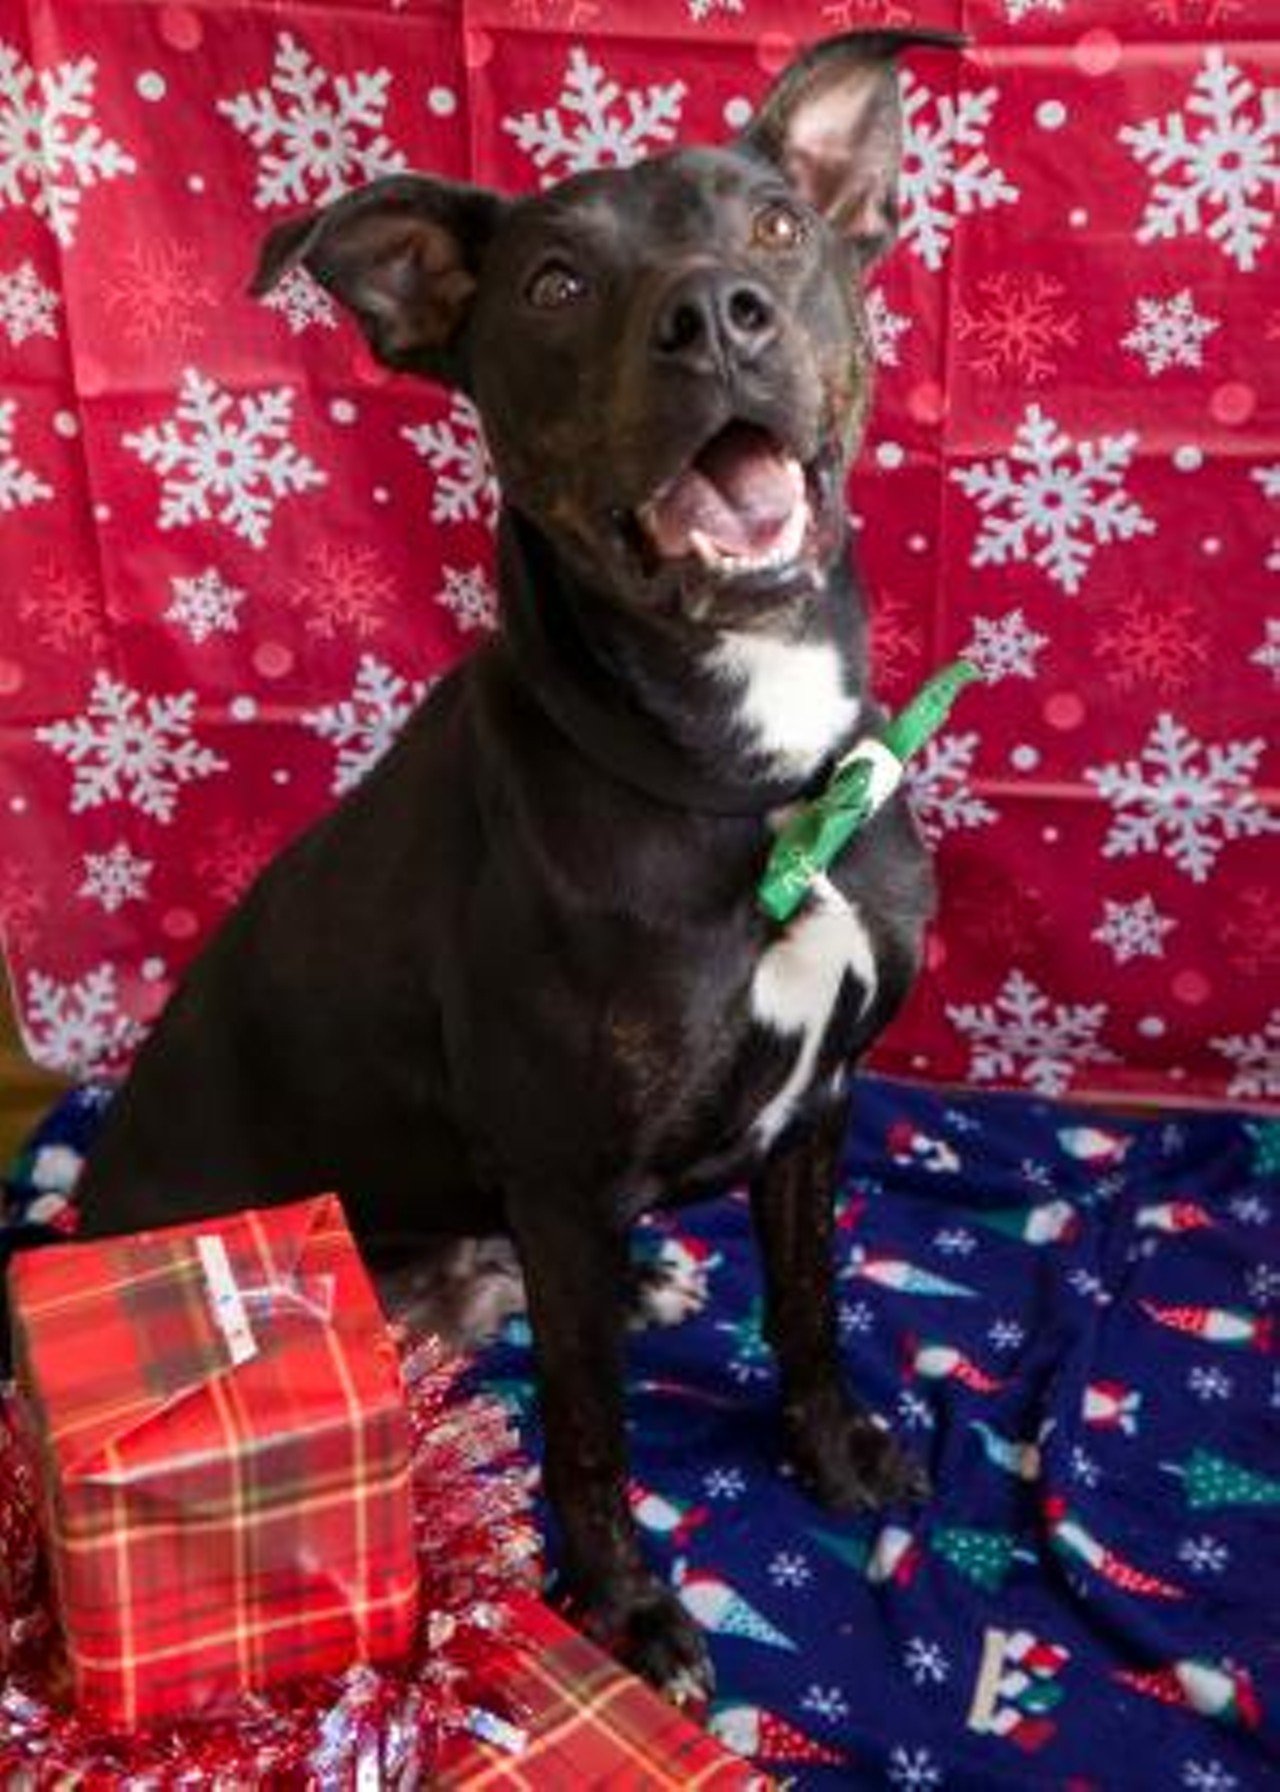 Floyd
Age: 2 Years Old / Breed: Mixed Breed / Sex: Male
“Hi I'm Floyd! I'm a young spunky guy who has the cutest ears in the shelter! I'm great with kids, but we're not sure how I do with other dogs or cats. It's recommended that you bring in any possible dog siblings so we can ensure we're a good fit! I can be very well behaved if you ask me to be and I know how to sit! I mean have you looked at my Holiday photo?! I'm sure darn cute! I've been in the shelter for a little while so I will need a refresher when it comes to housebreaking. Stop by the shelter and you'll see why we should be the best of friends!”